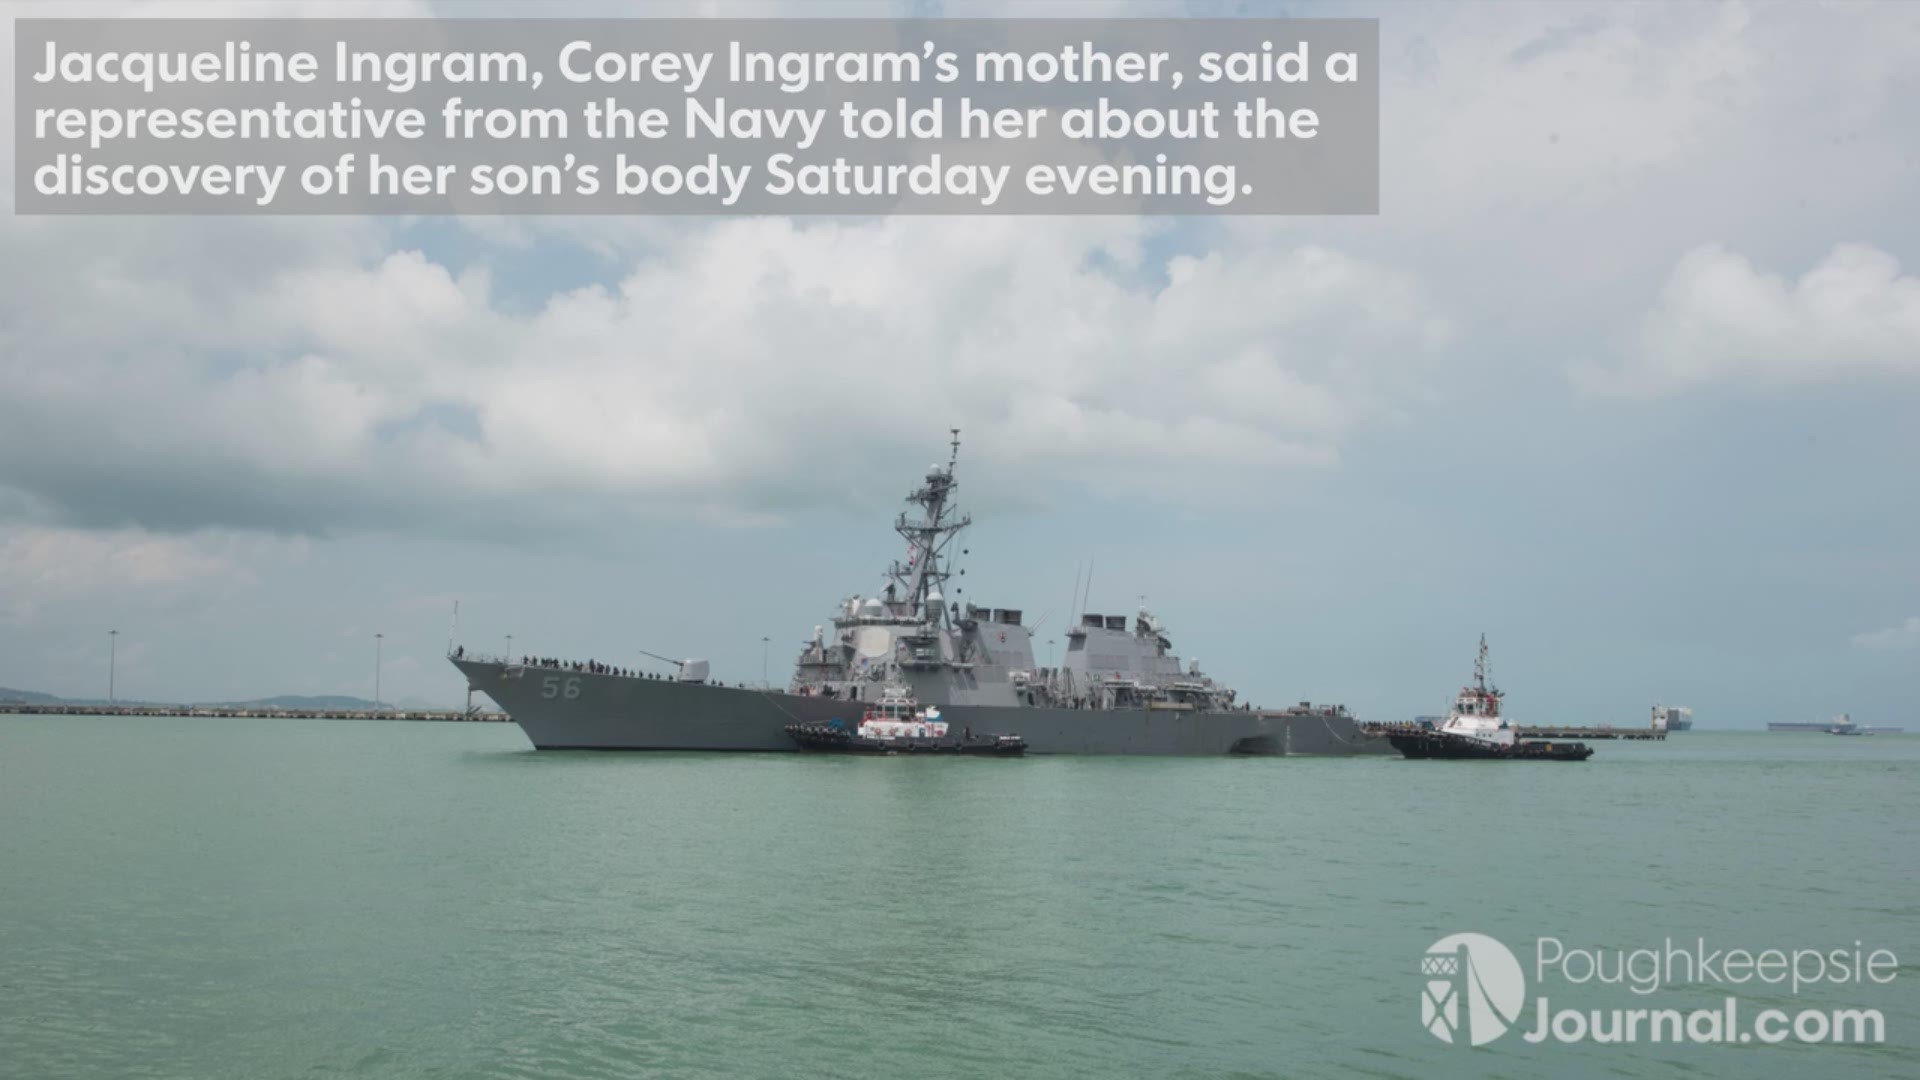 The body of Corey Ingram, the Poughkeepsie sailor who was missing at sea following the collision of the USS John McCain, has been recovered, according to his family. Jack Howland/Poughkeepsie Journal